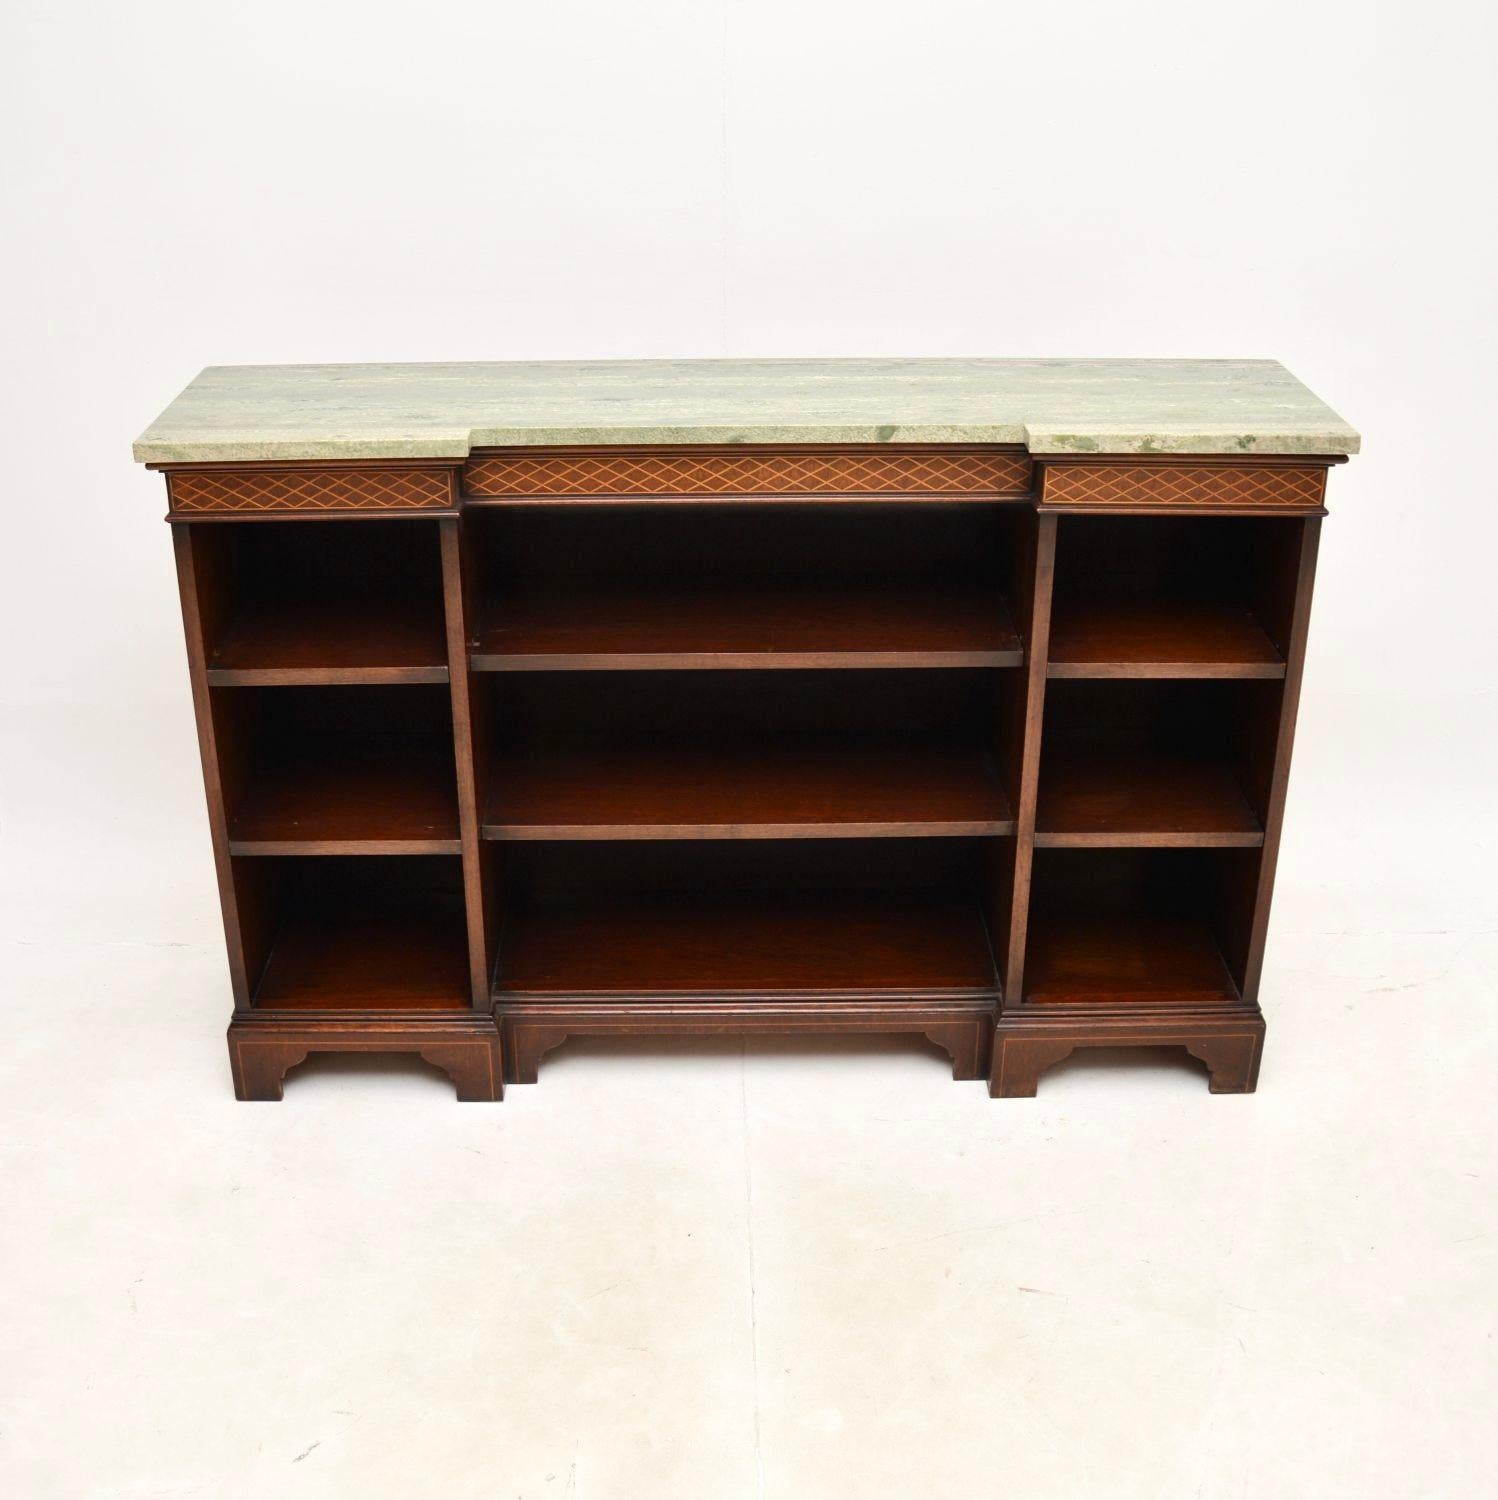 A superb antique marble top open bookcase / sideboard. This was made in England, it dates from around the 1910-20’s.

This has a lovely inverted breakfront design, with a gorgeous light green marble top. The front is open with lots of adjustable